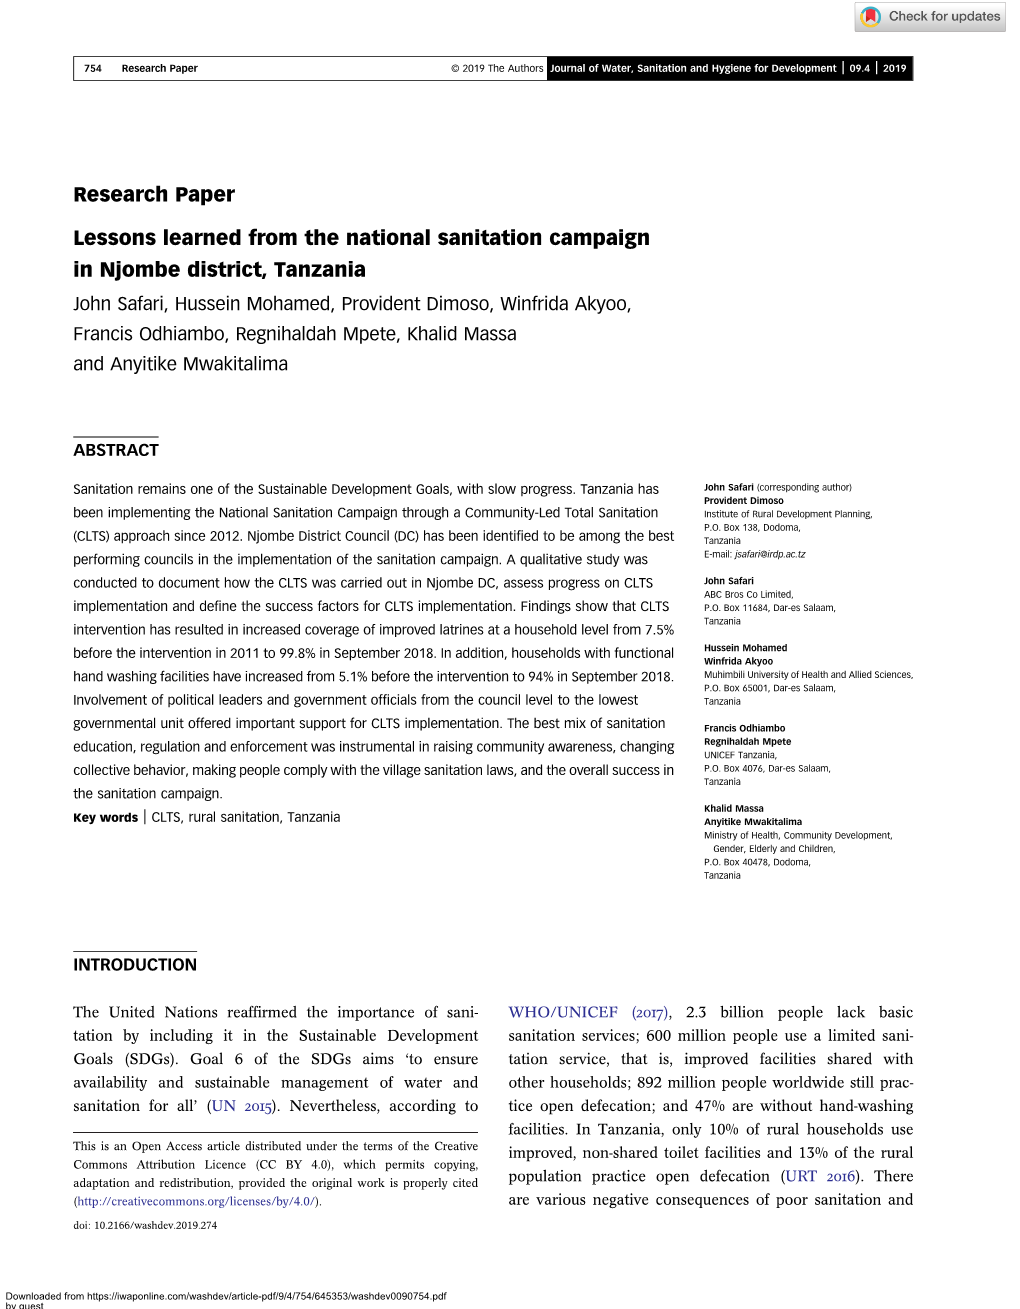 Research Paper Lessons Learned from the National Sanitation